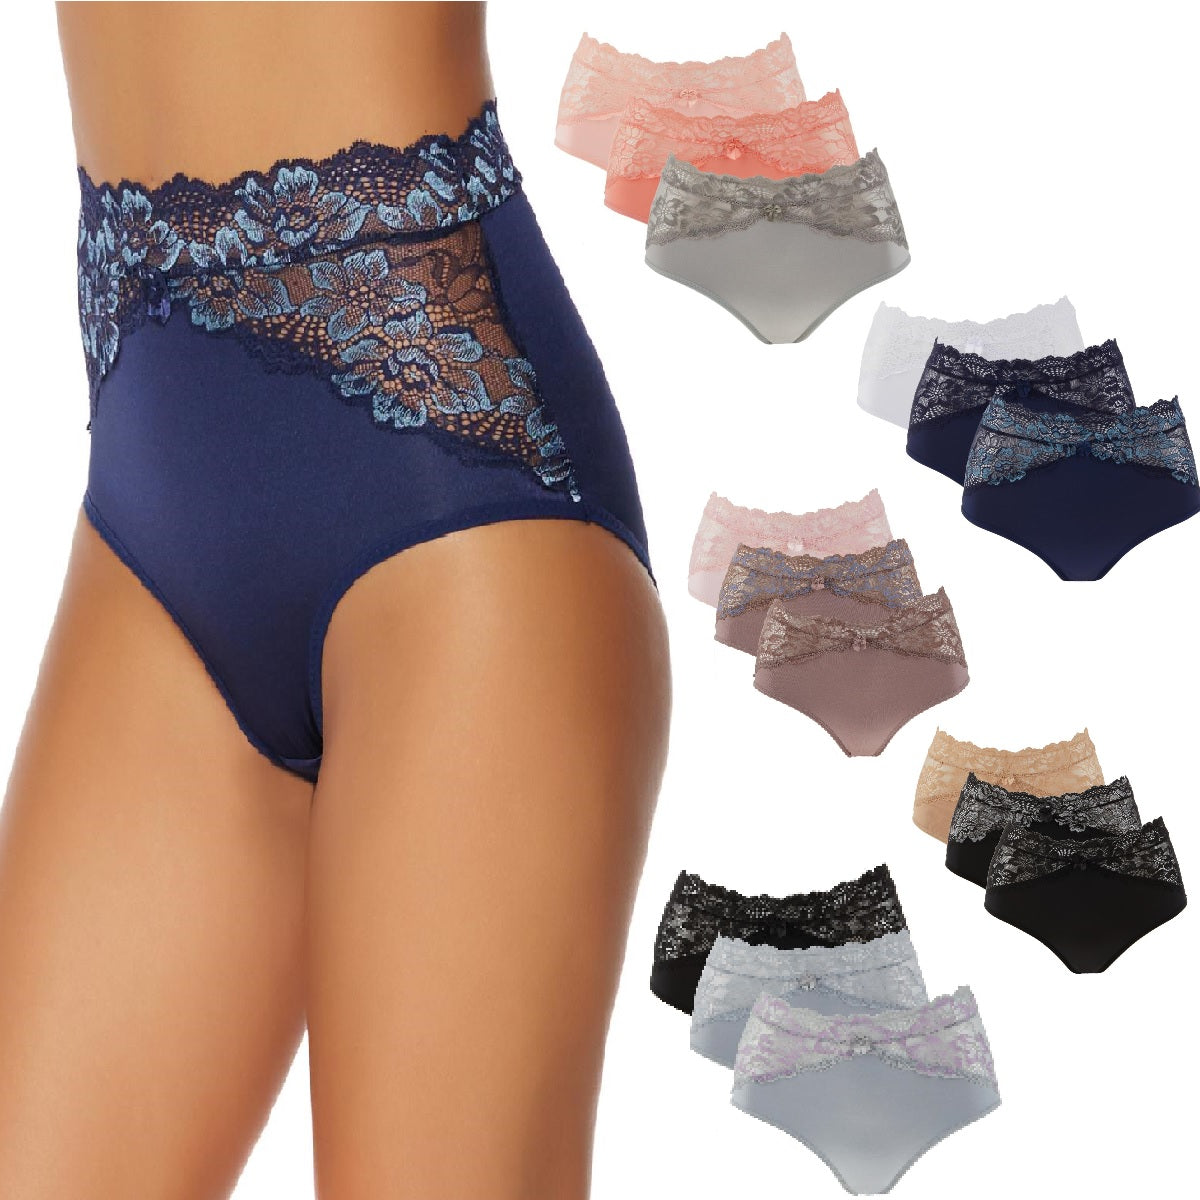 Rhonda Shear 3-pack Brief Panty with Lace Trim – goSASS